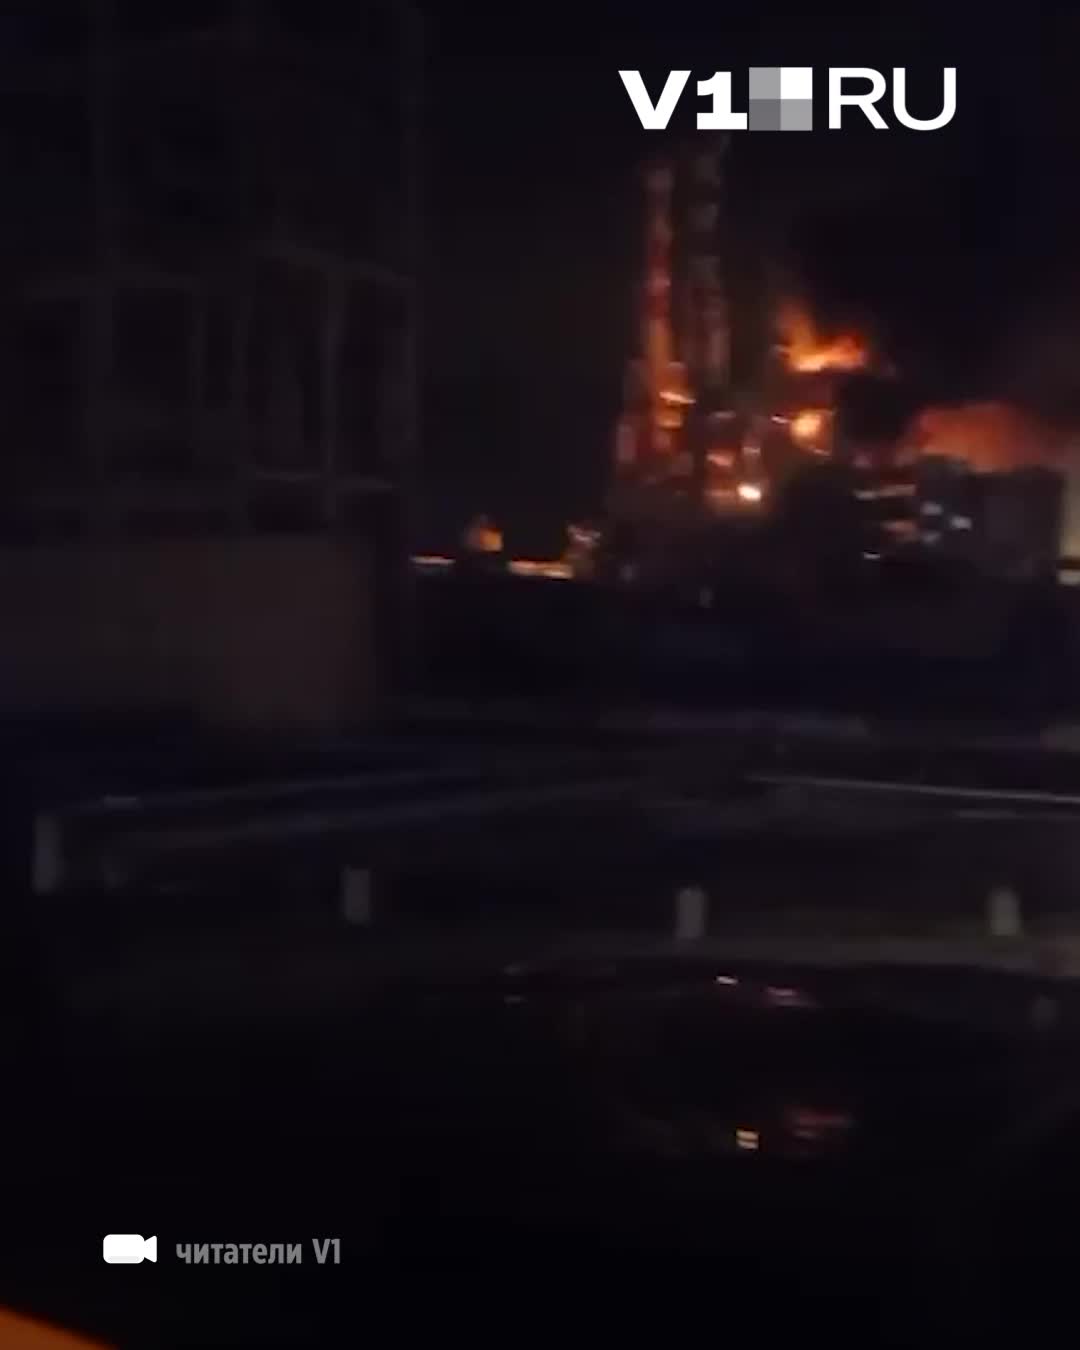 One of the main units of Volgograd refinery ELOU-AVT-5 was reportedly on fire as result of drone strike